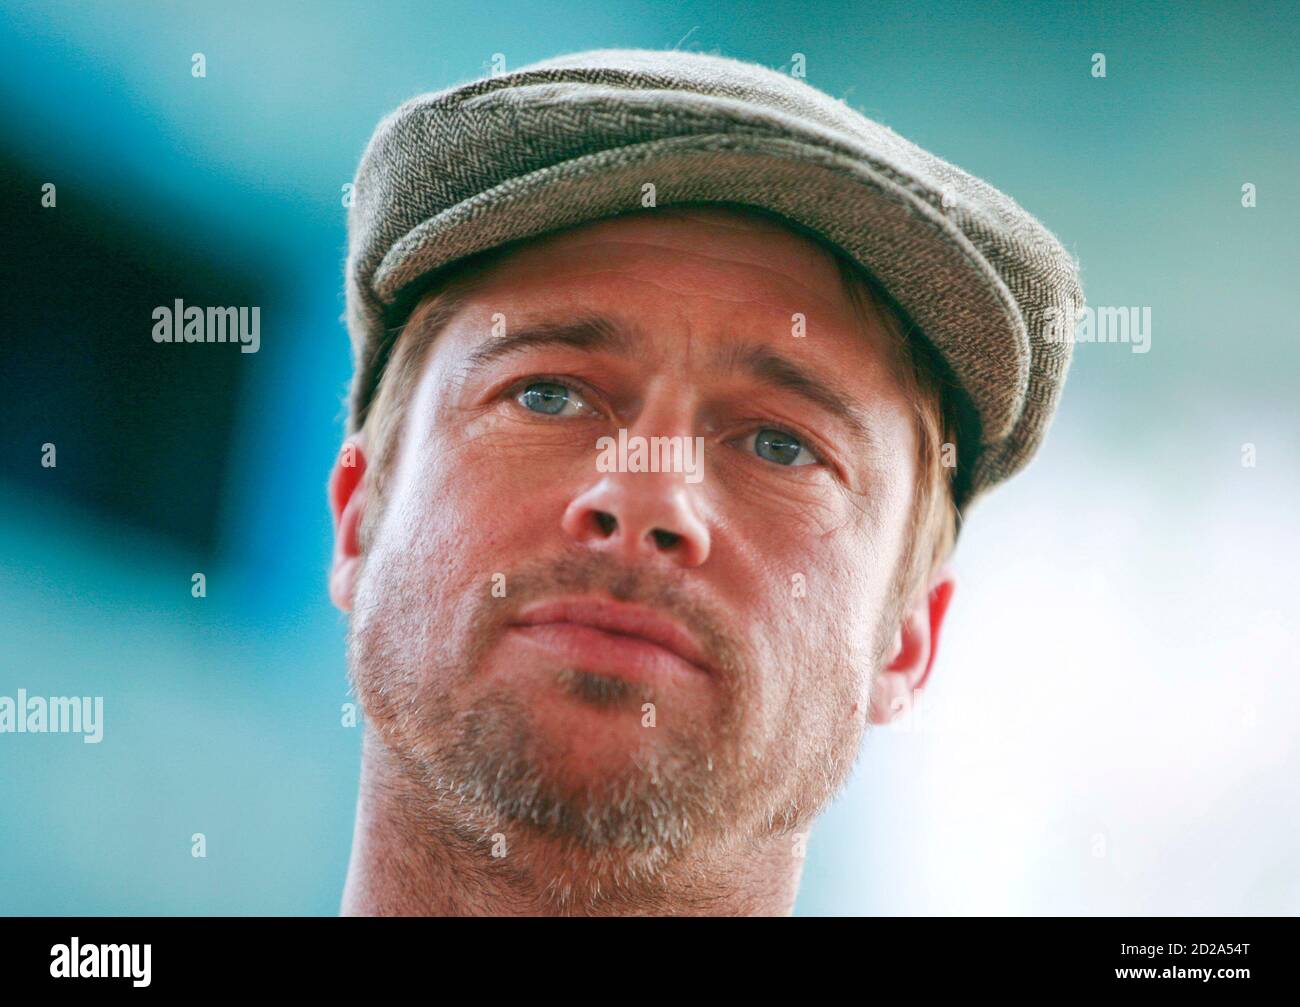 Actor Brad Pitt attends a milestone celebration for Global Green's sustainable, low-income home in the Lower Ninth Ward of New Orleans, Louisiana August 21, 2007.  REUTERS/Lee Celano (UNITED STATES) Stock Photo